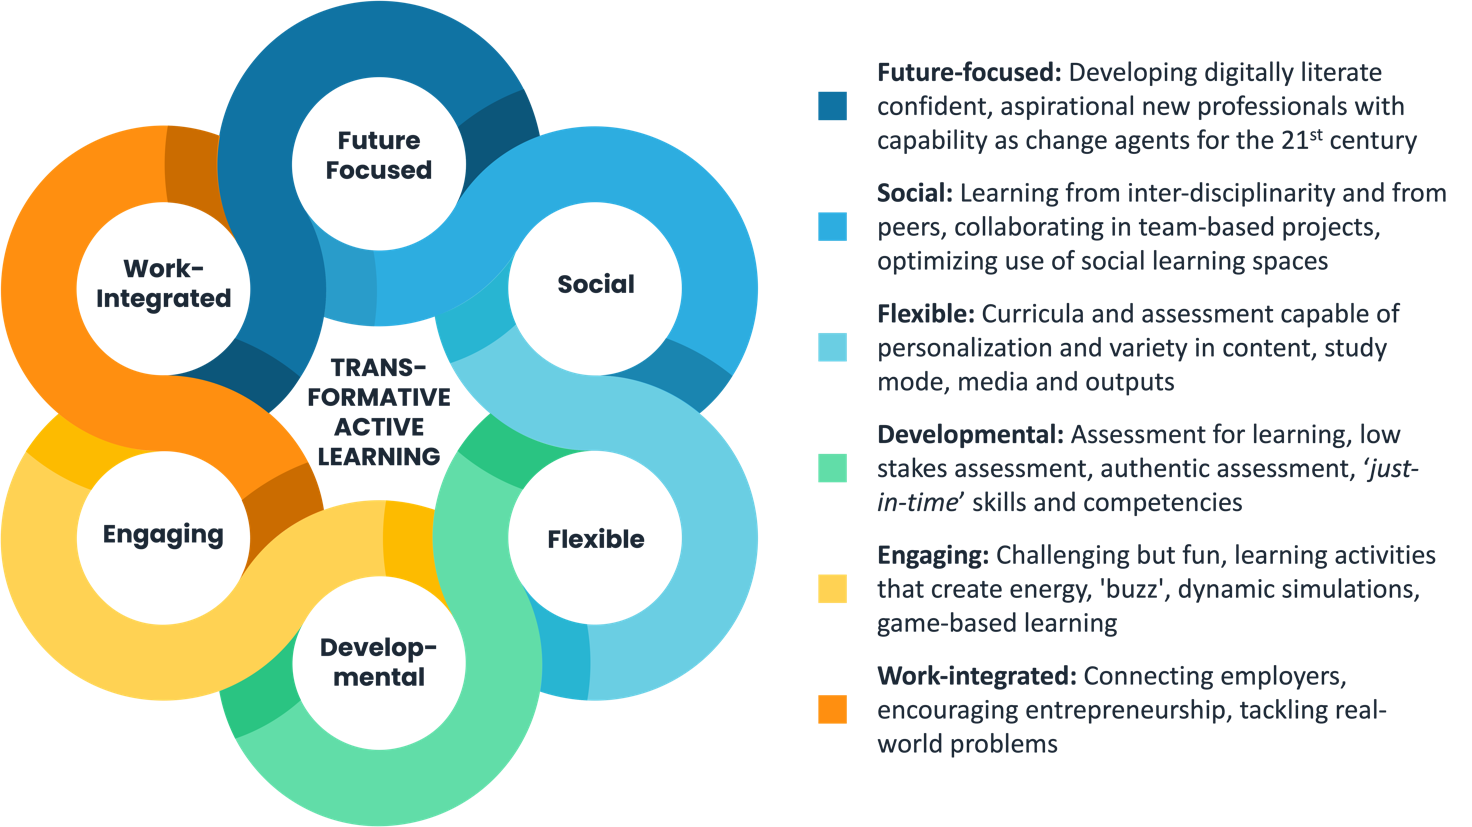 Diagram showing the 6 key themes of our transformative active learning community.  Future-focused, Social, Flexible, Developmental, Engaging, and Work-integrated.  Themes are explained in detail in the main body of the paper.